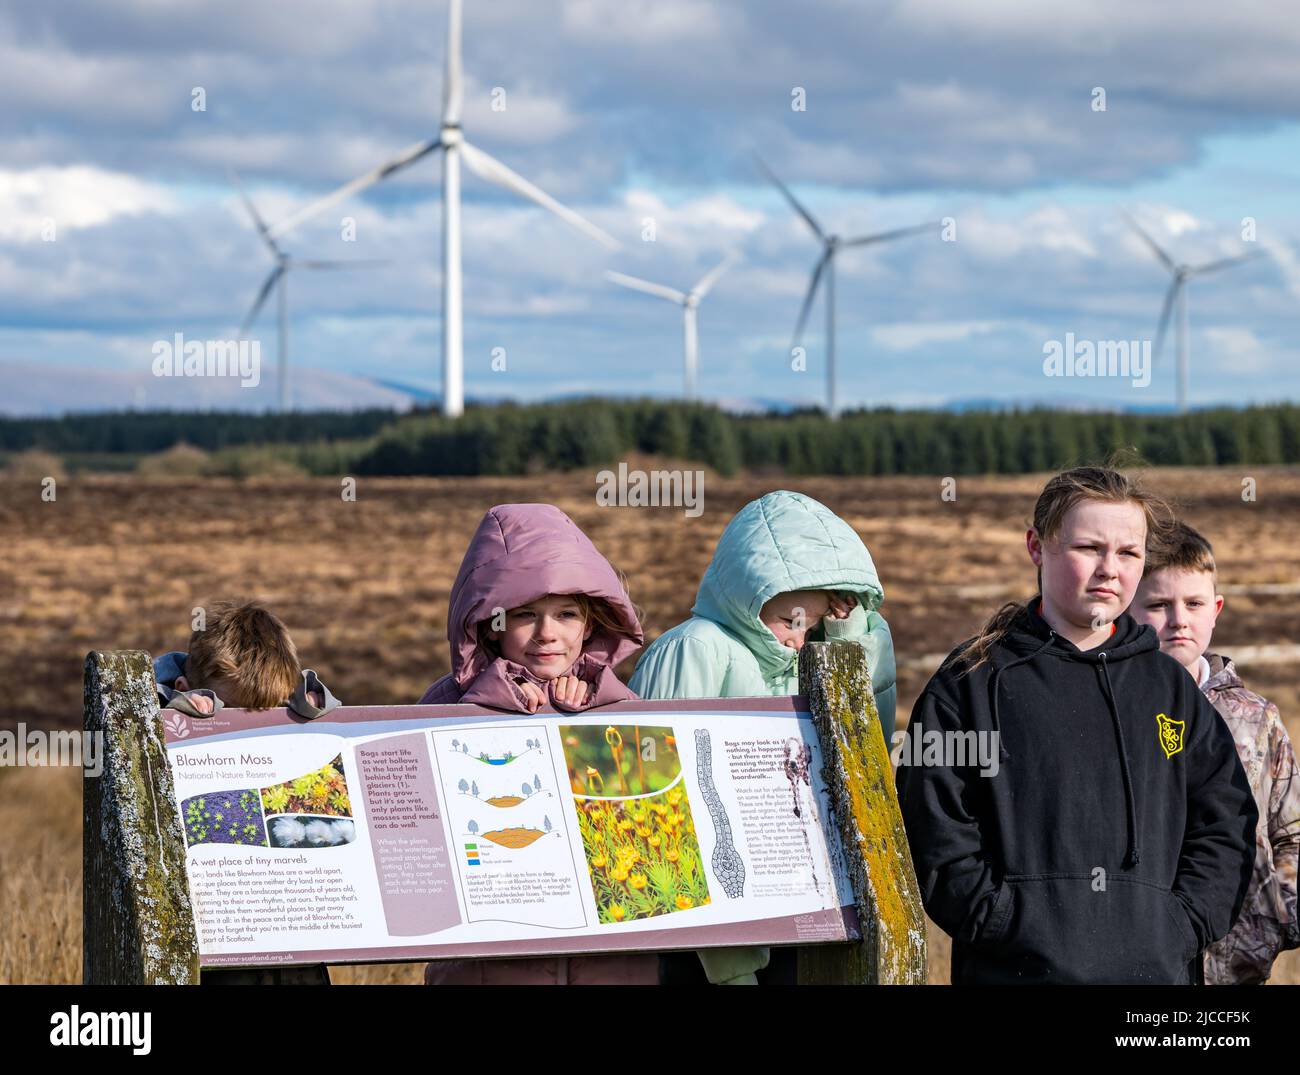 Cold school children at information board, Blawhorn Moss national nature reserve, West Lothian, Scotland, UK Stock Photo